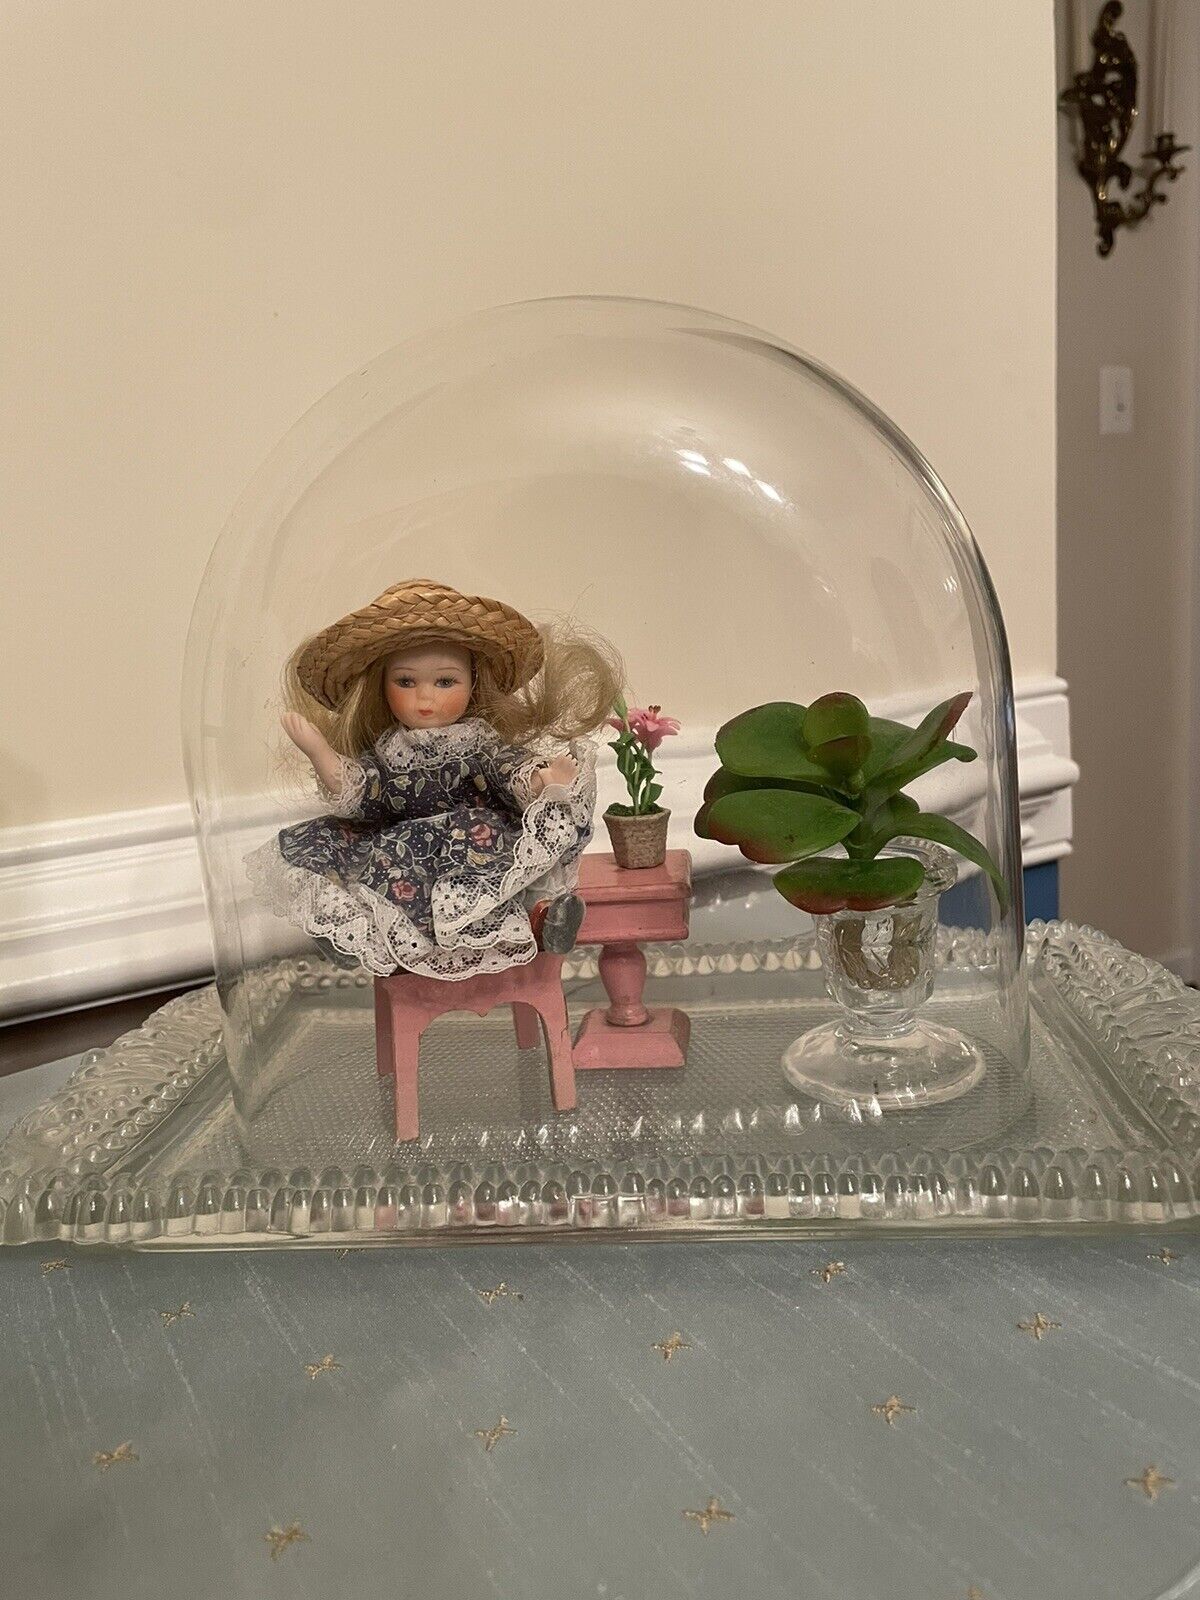 Decorative Oval Glass Dome Cloche Antique Under Tray Items Inside Not Included